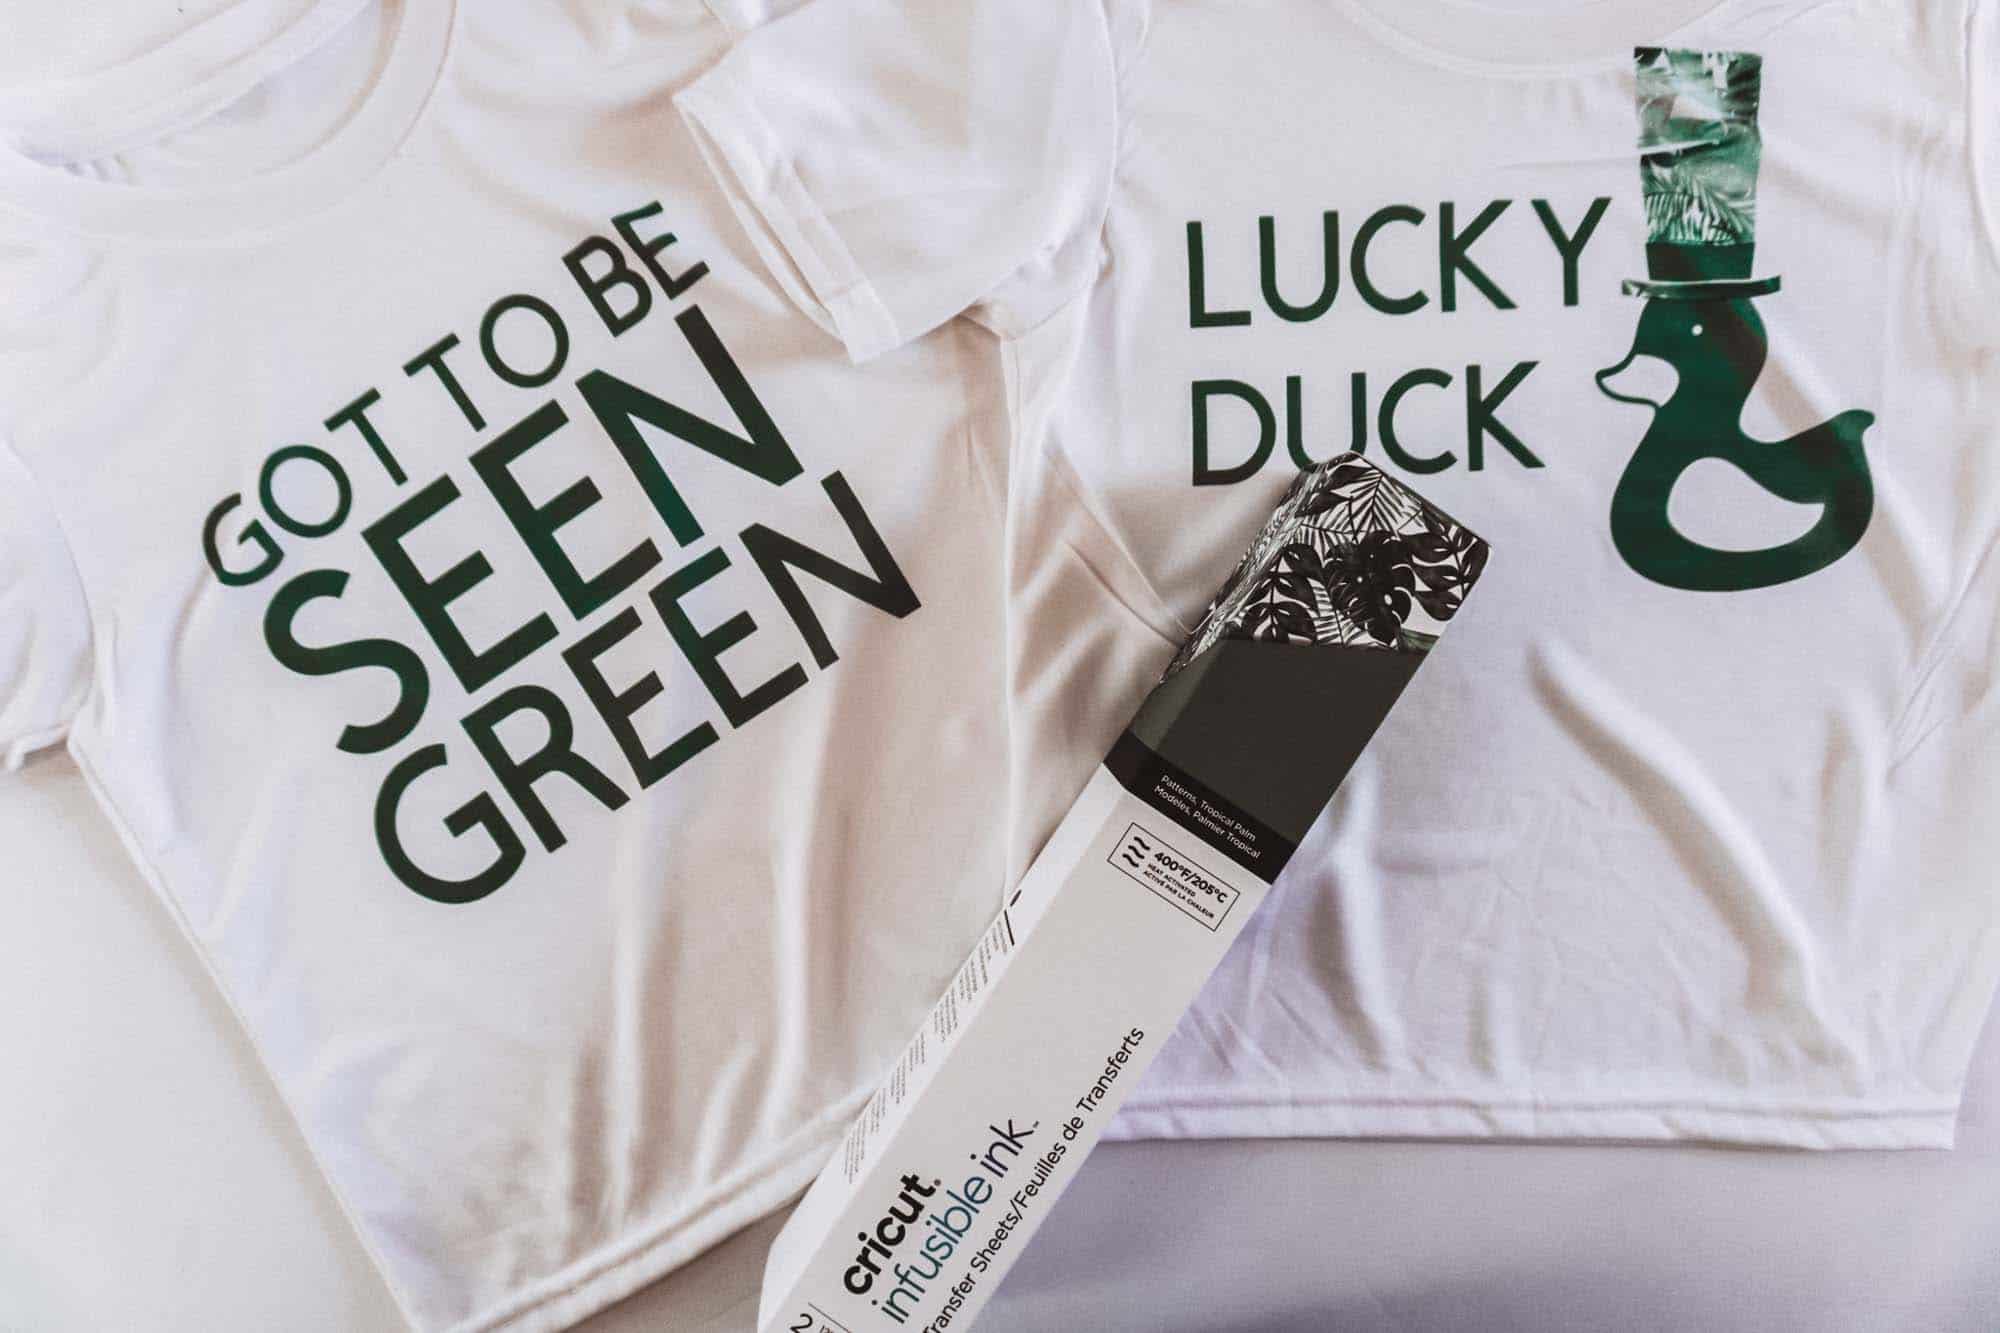 I've got three funny St. Patrick's Day shirts for you here! Also included are step by step instructions for infusible ink.